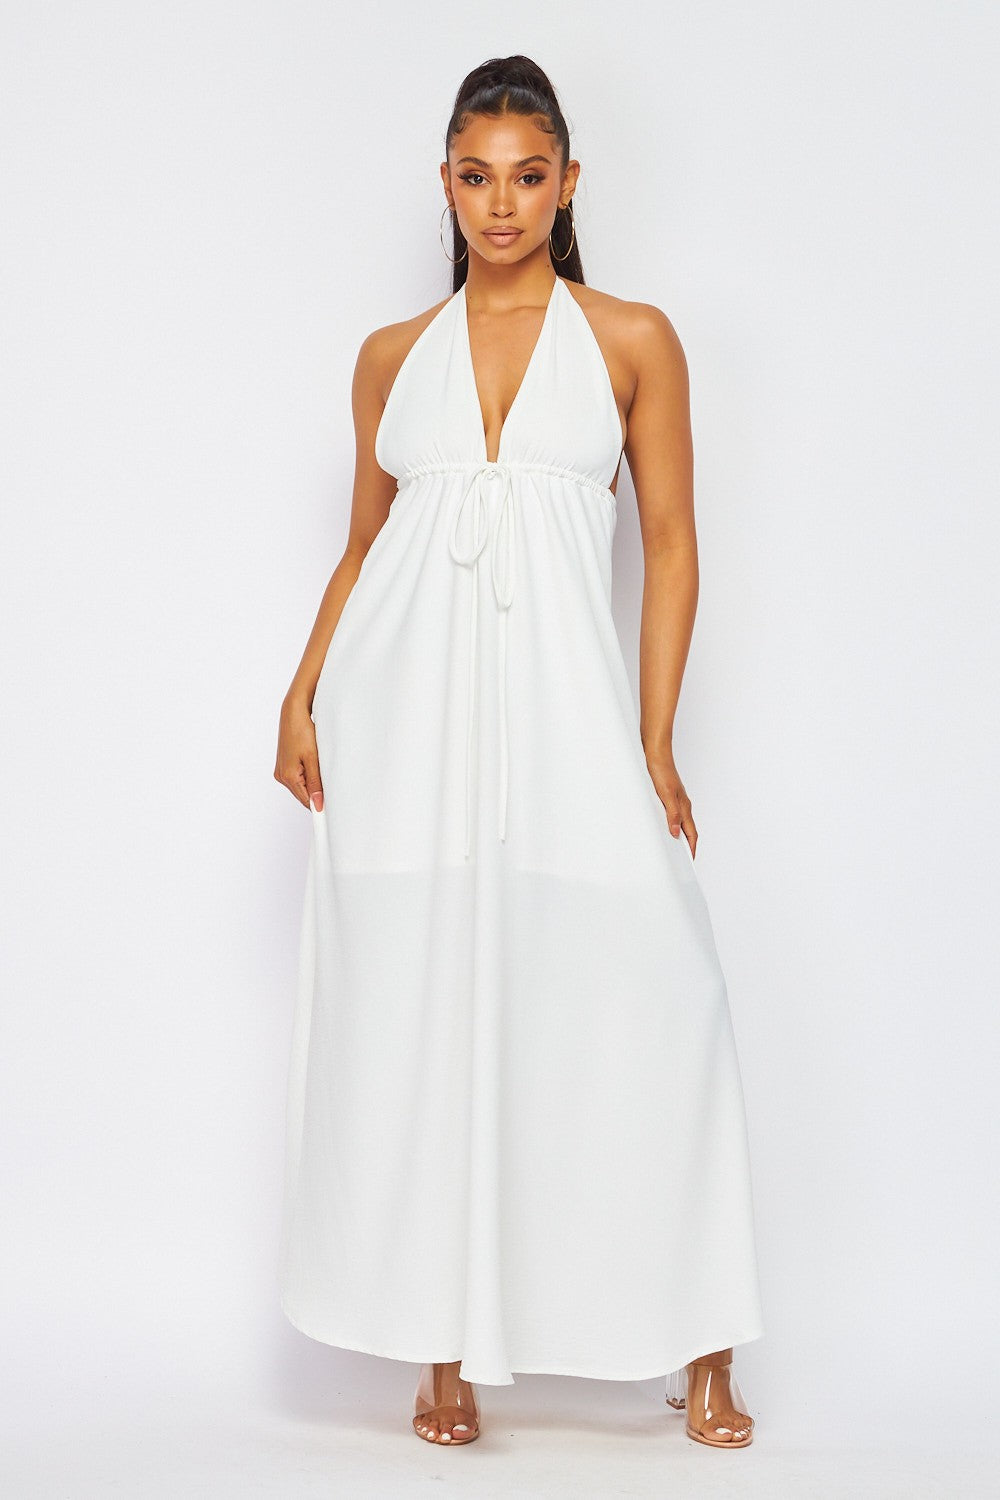 You're The One Flowing Halter Maxi Dress